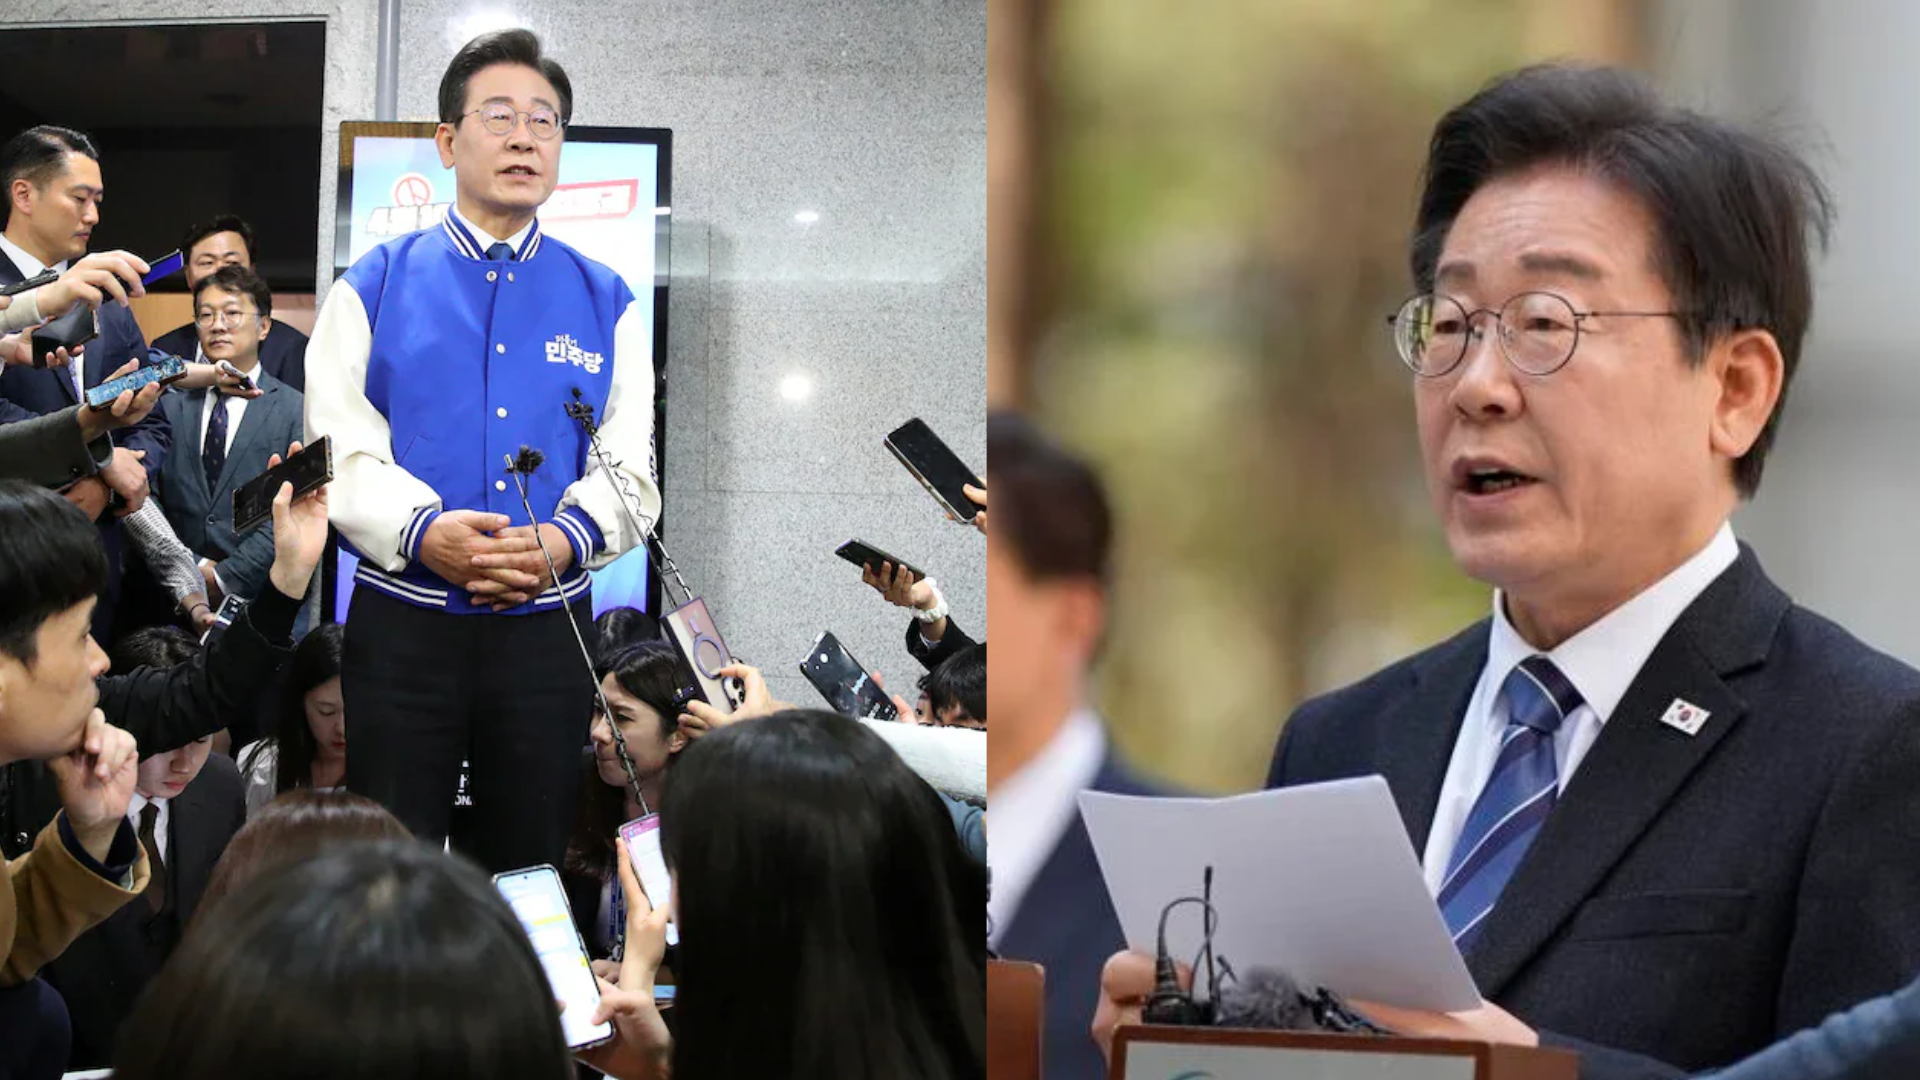 Liberal Opposition Landslide Victory In South Korea’s Parliamentary Elections